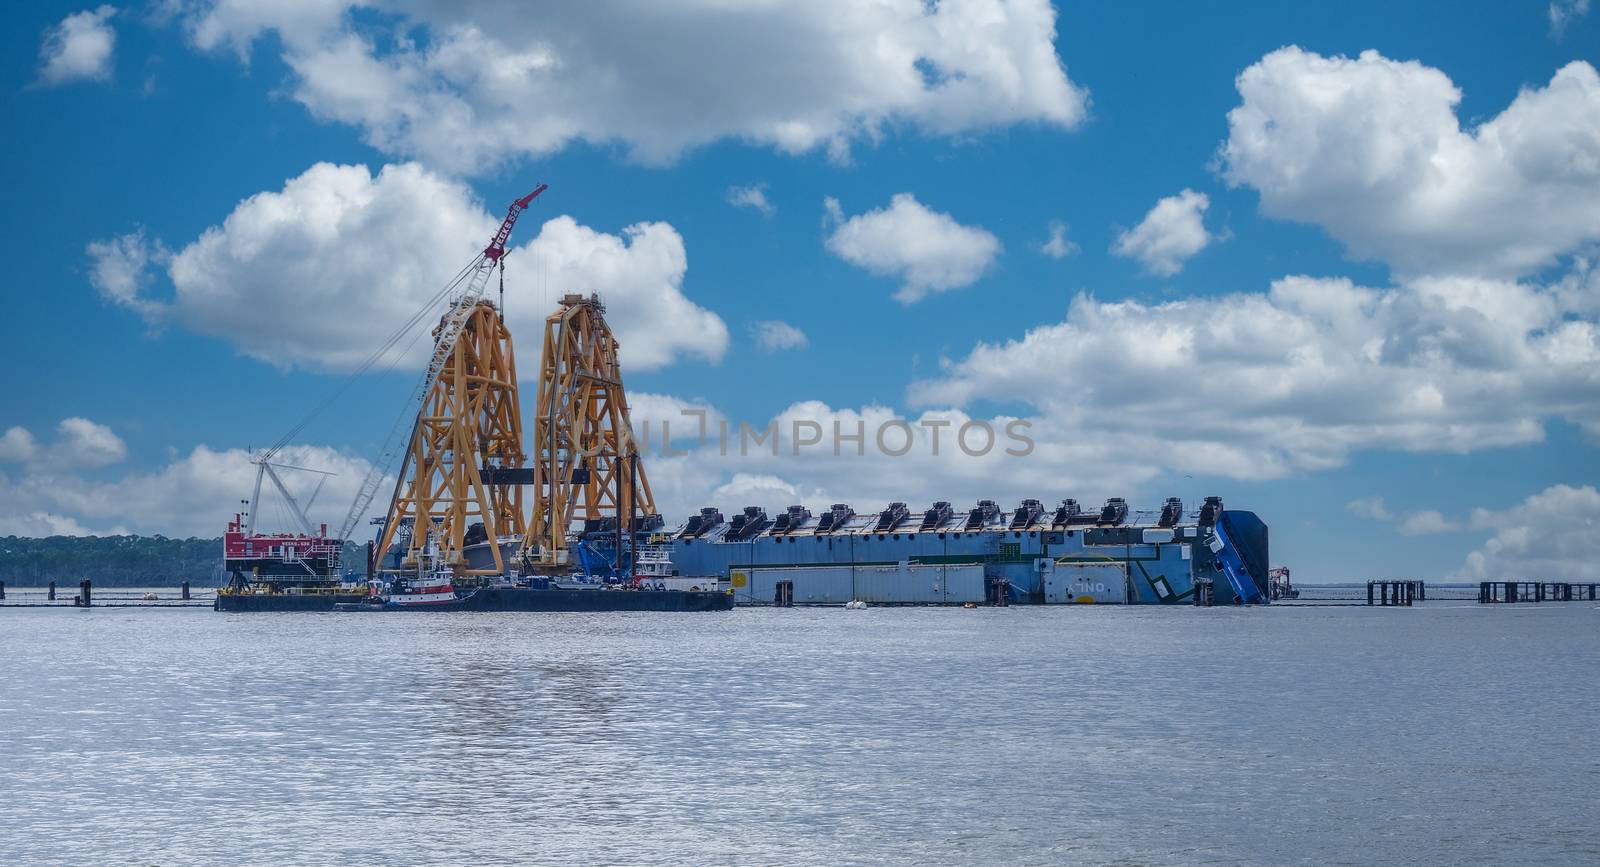 BRUNSWICK, GEORGIA - November 1, 2020: A year after a South Korean ship carrying 4,200 cars overturned, a giant floating crane is erected over it to begin cutting it up and hauling it away.